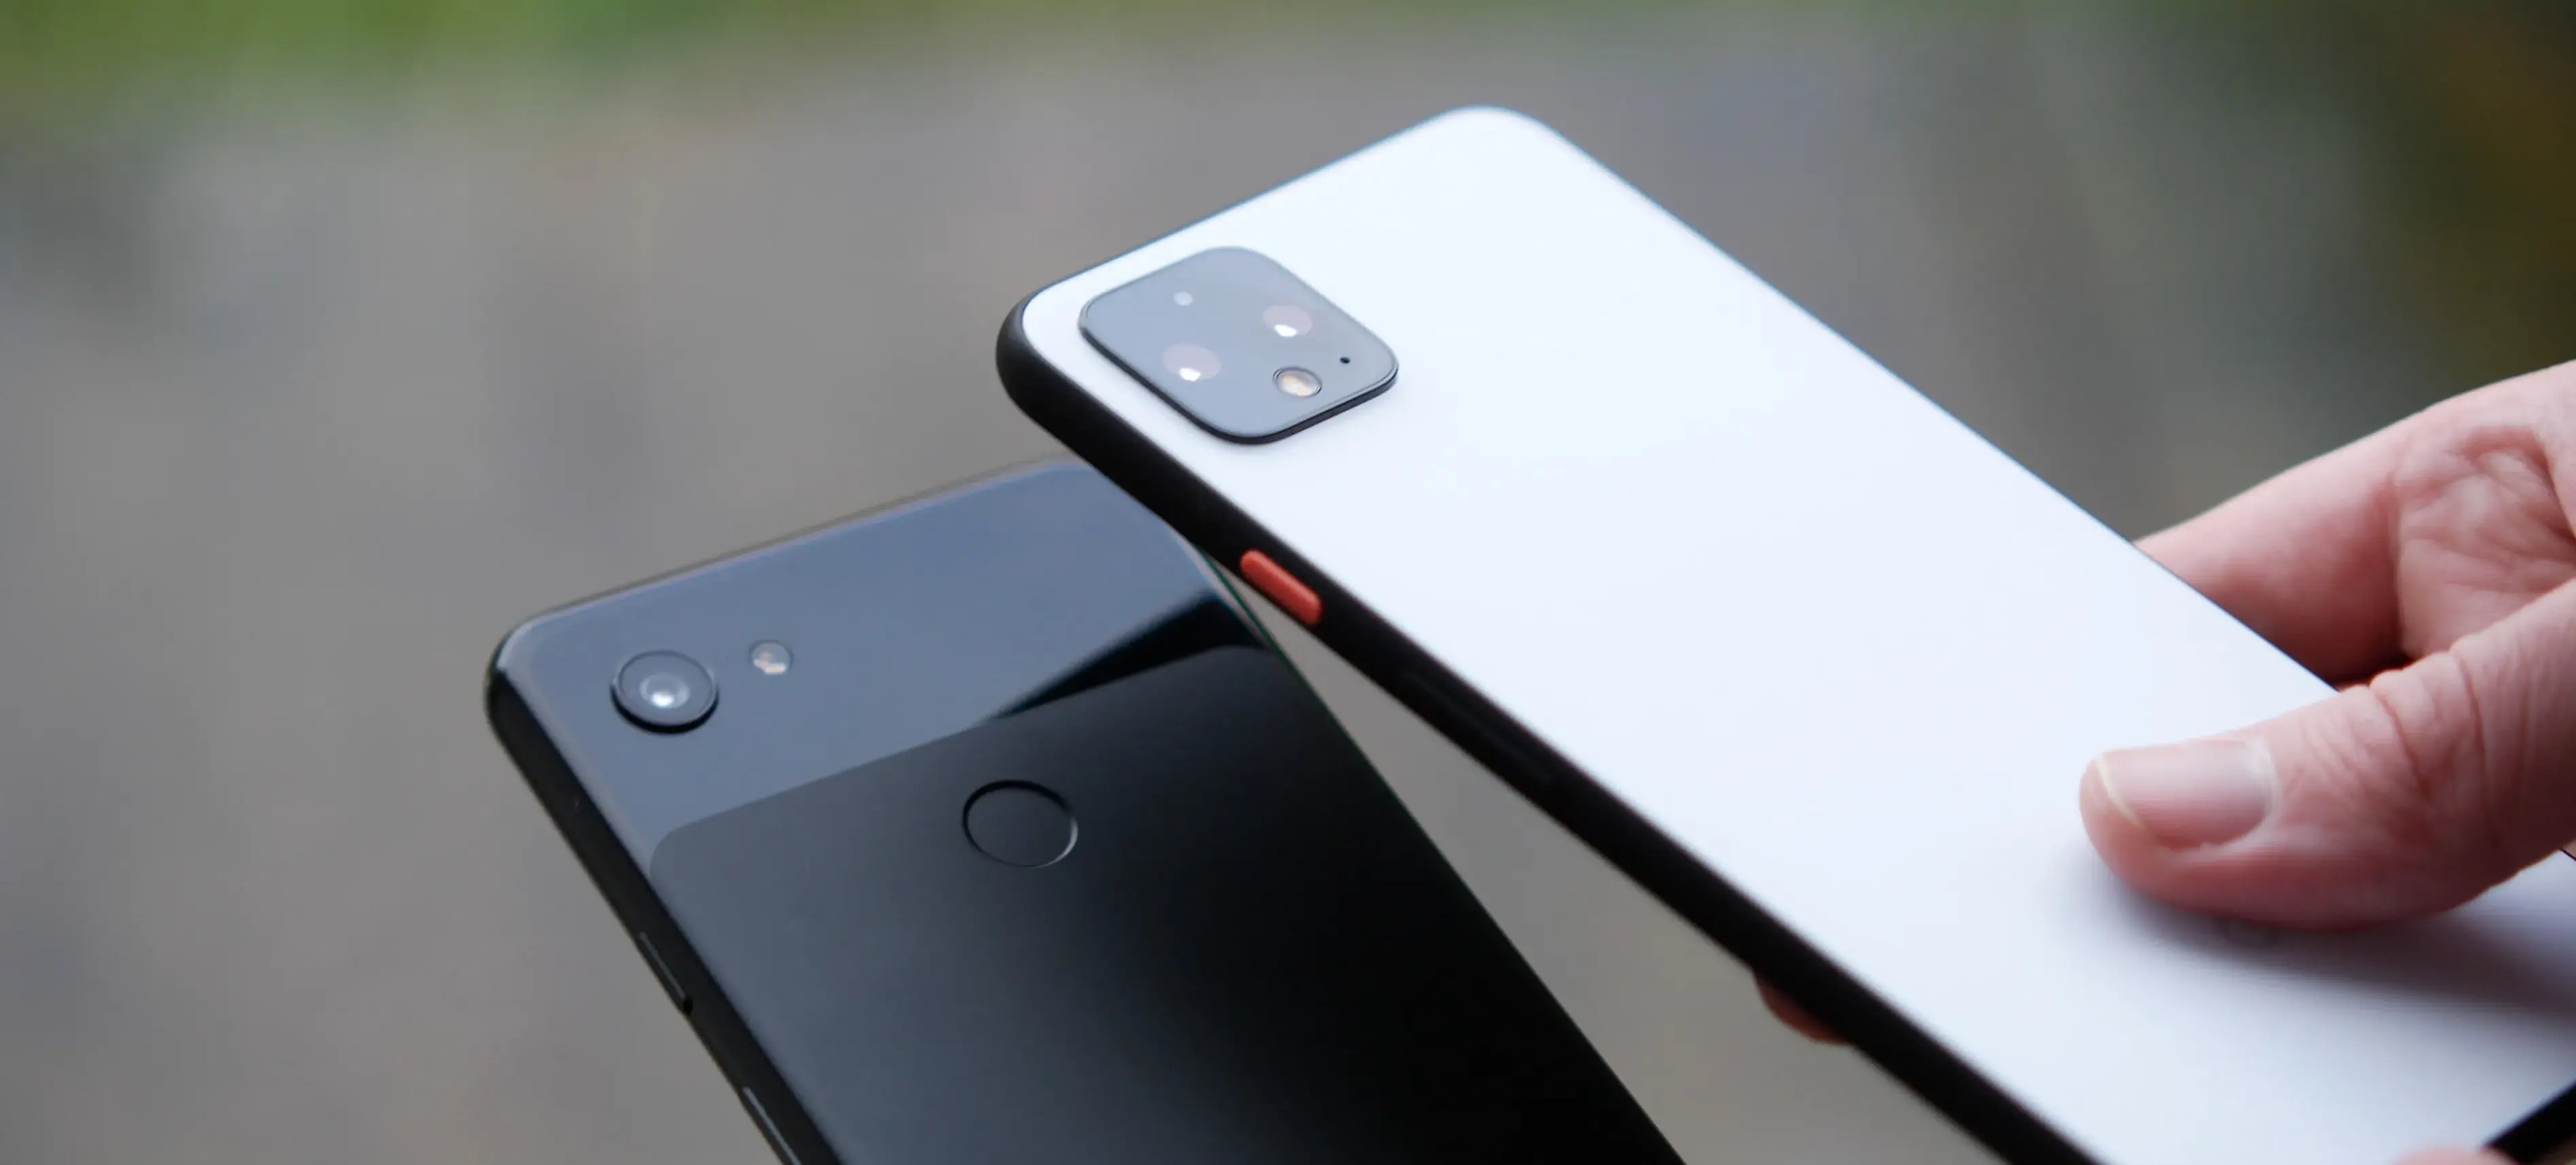 Availability Of RCS On Google Pixel 4 And Release Date